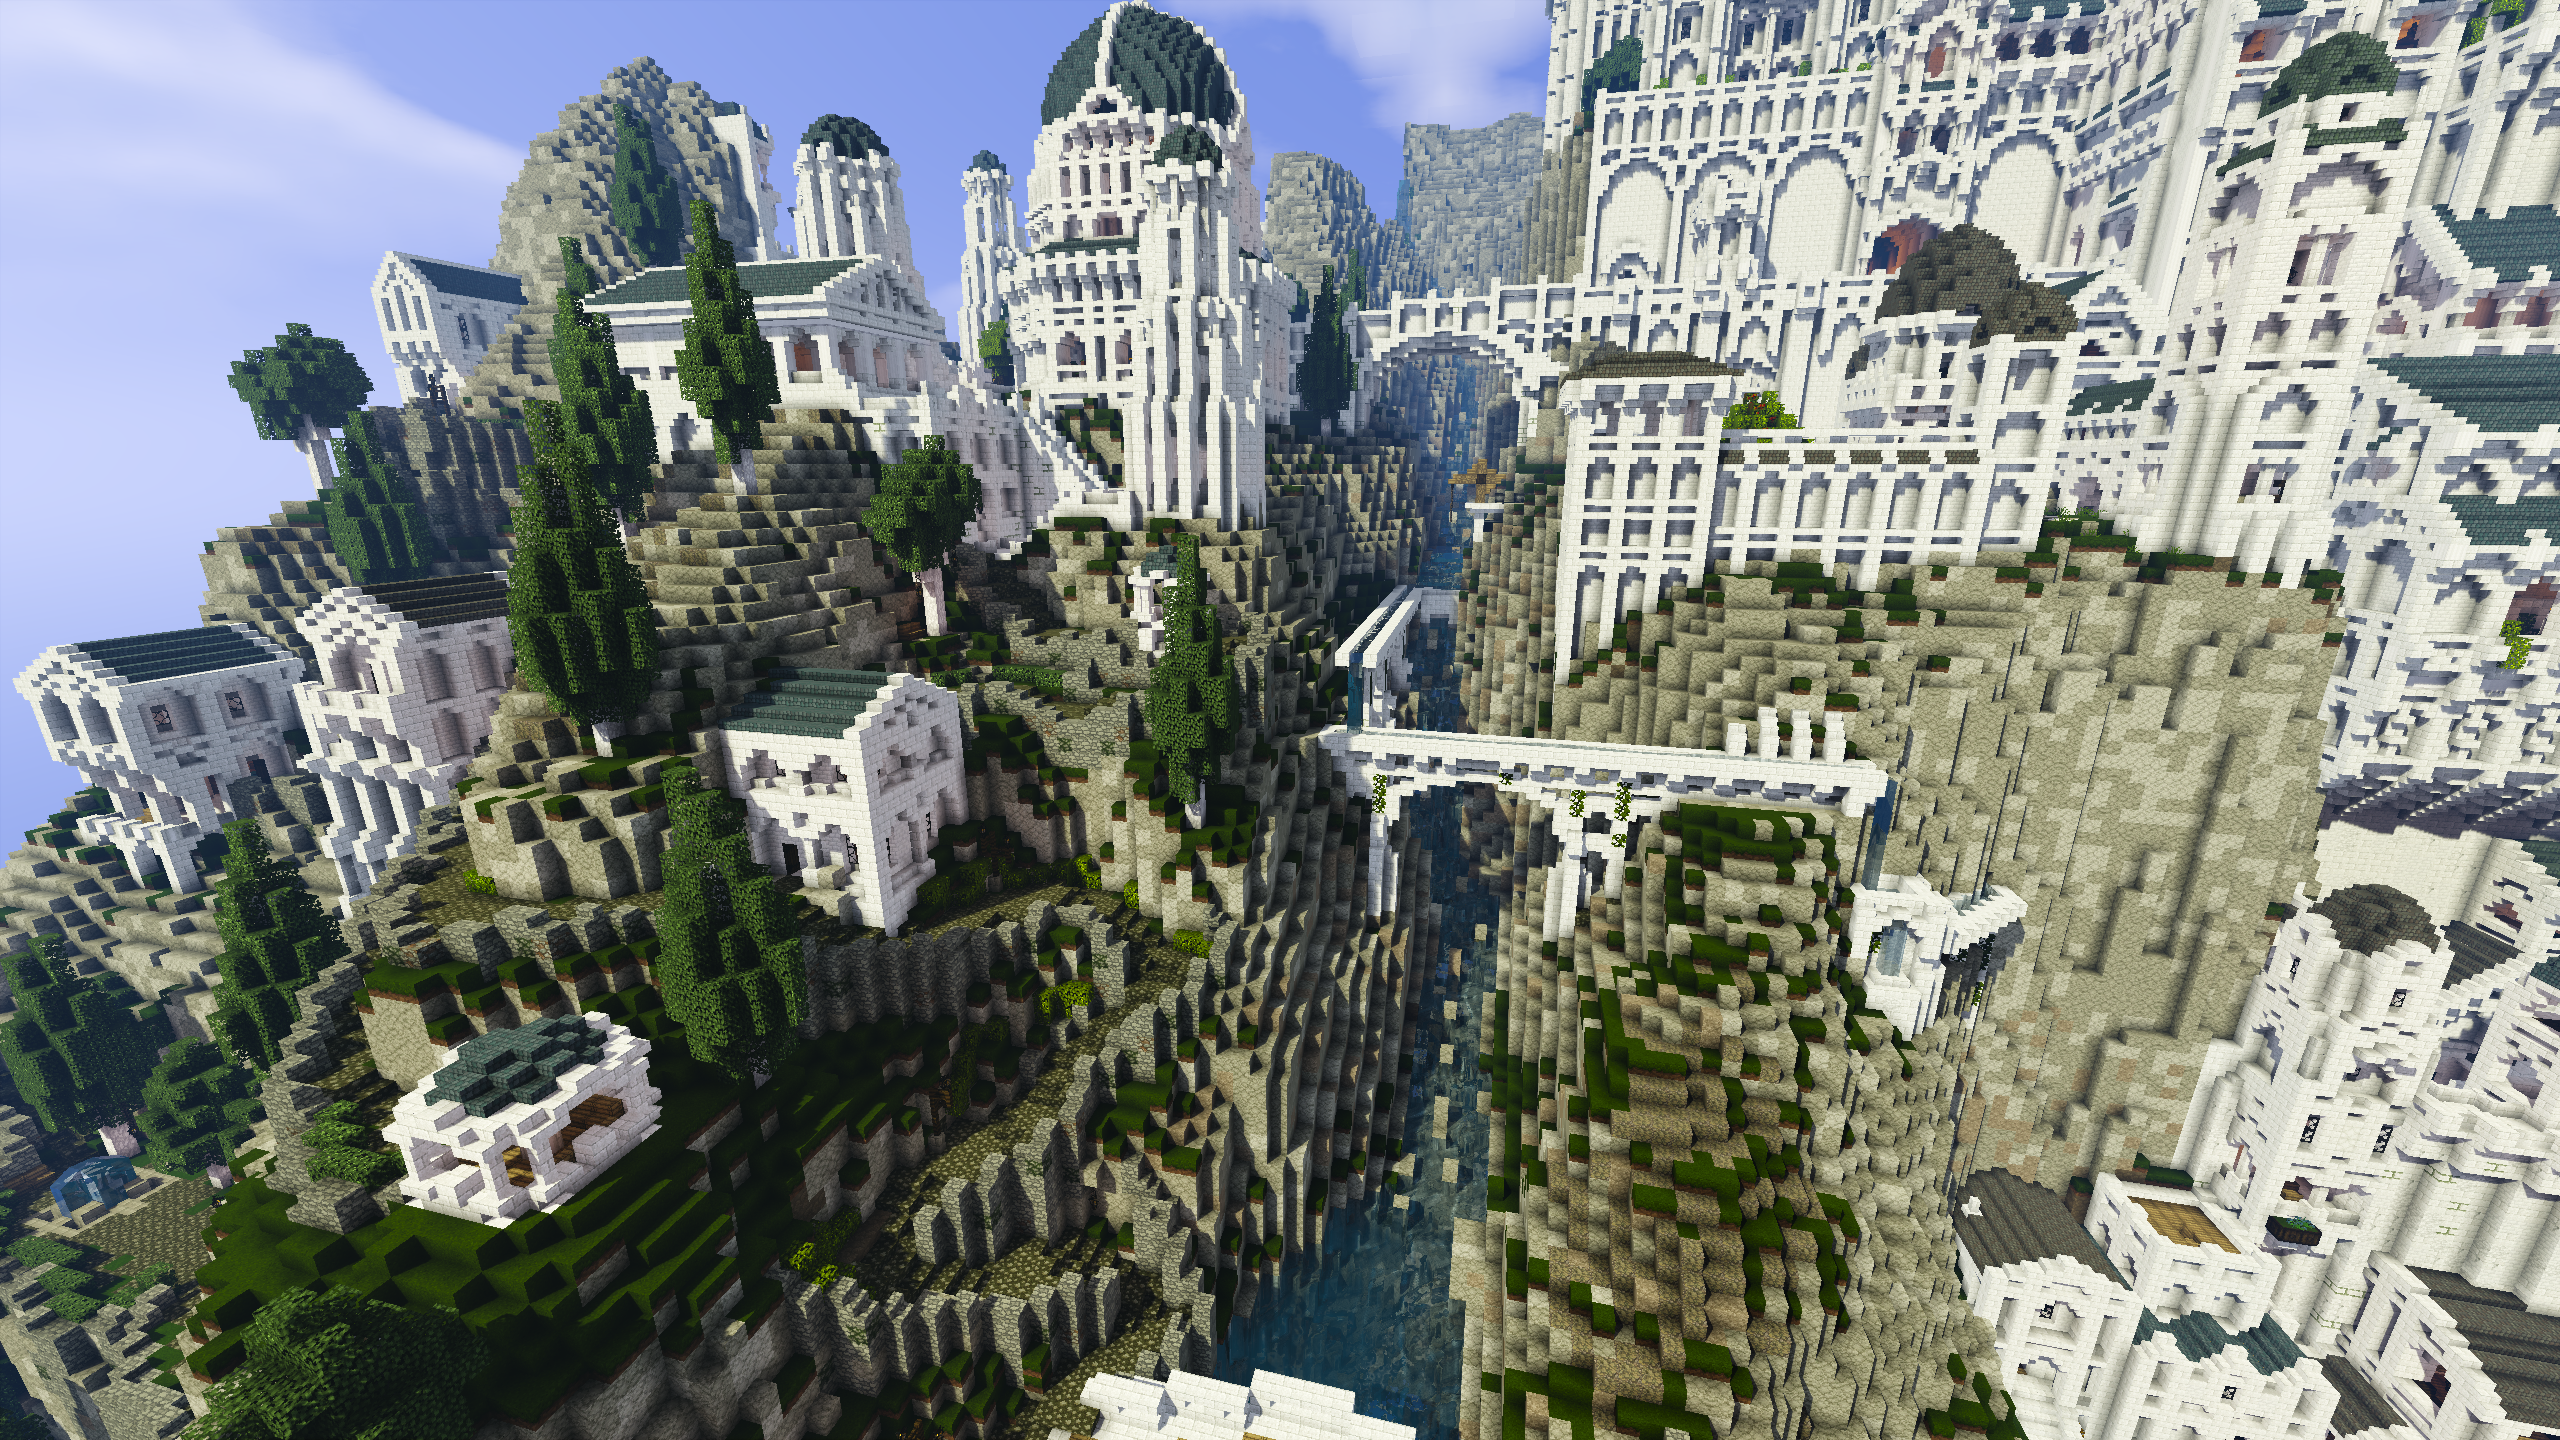 MINECRAFT MIDDLE EARTH